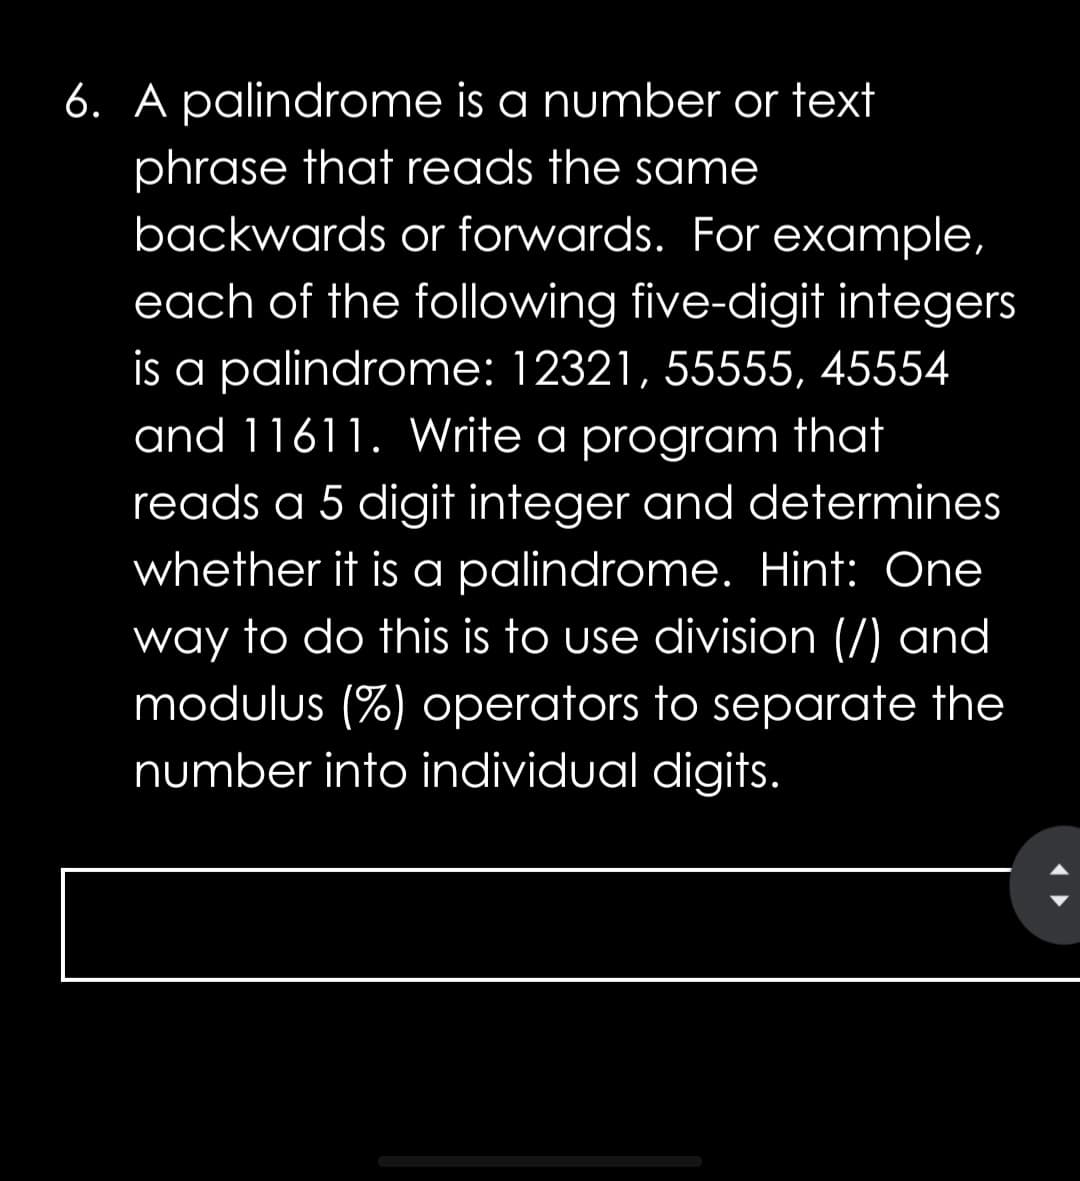 6. A palindrome is a number or text
phrase that reads the same
backwards or forwards. For example,
each of the following five-digit integers
is a palindrome: 12321, 55555, 45554
and 11611. Write a program that
reads a 5 digit integer and determines
whether it is a palindrome. Hint: One
way to do this is to use division (/) and
modulus (%) operators to separate the
number into individual digits.
